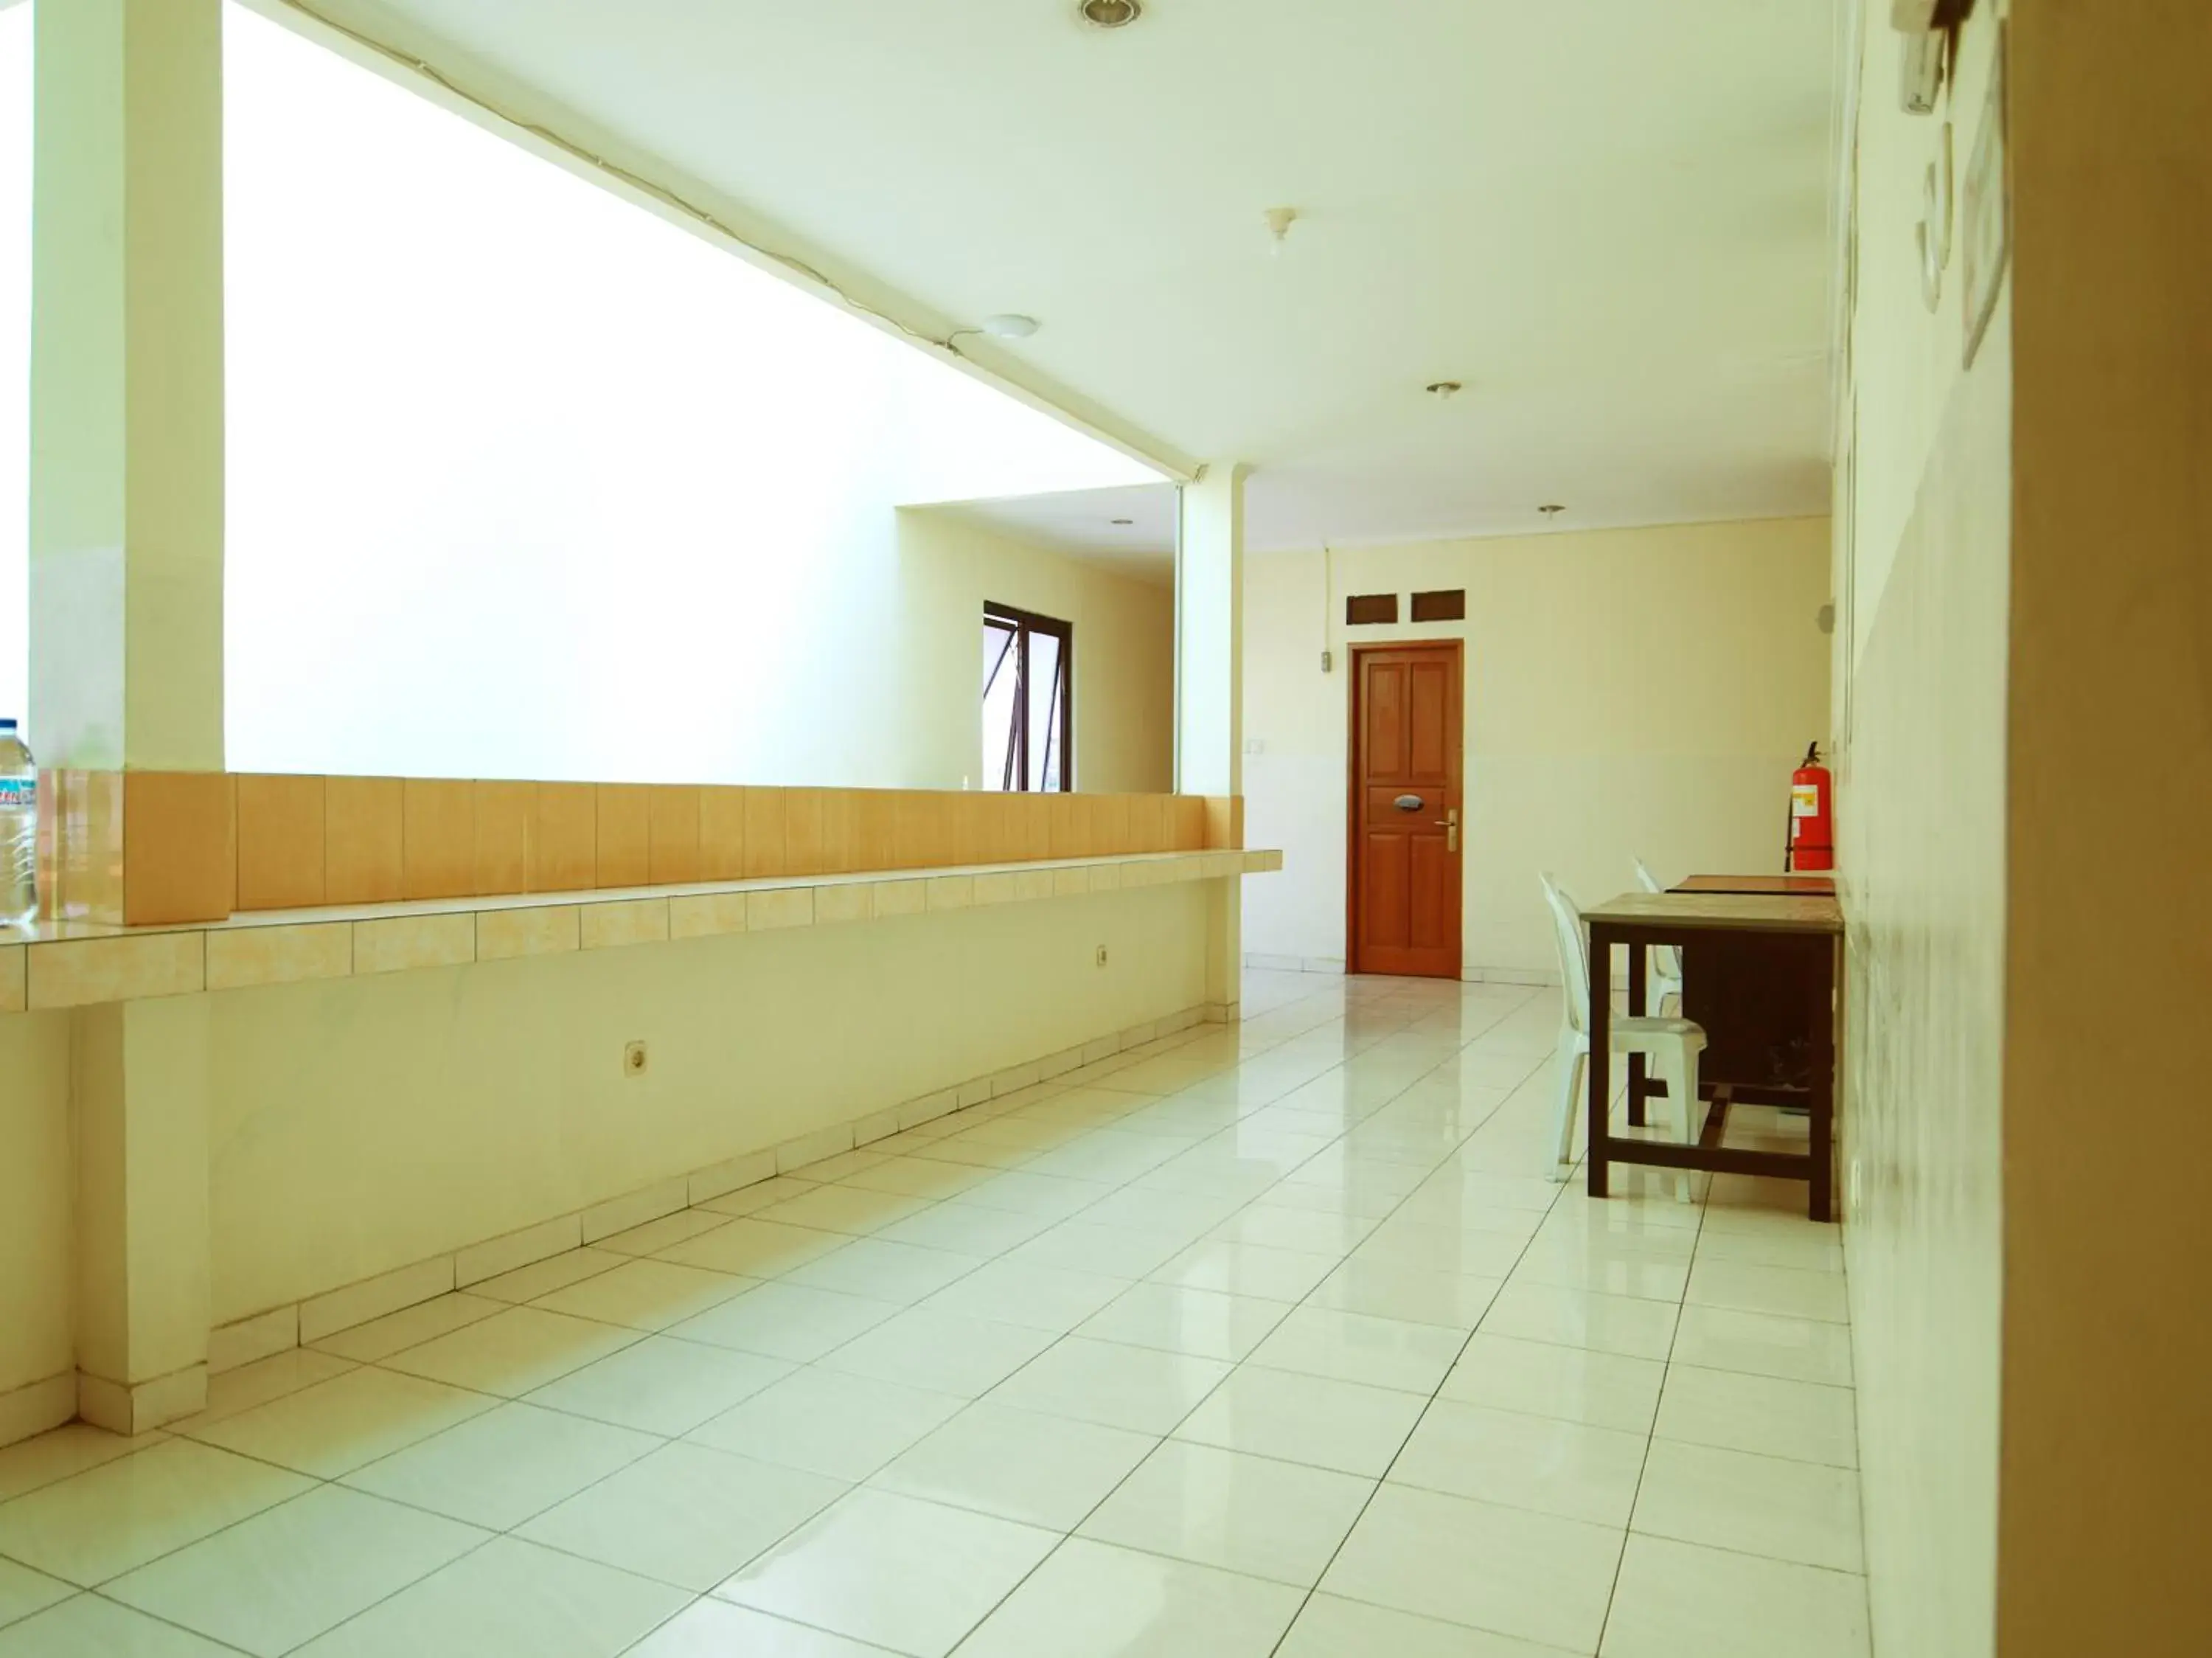 Area and facilities in OYO 196 Horizone Residence